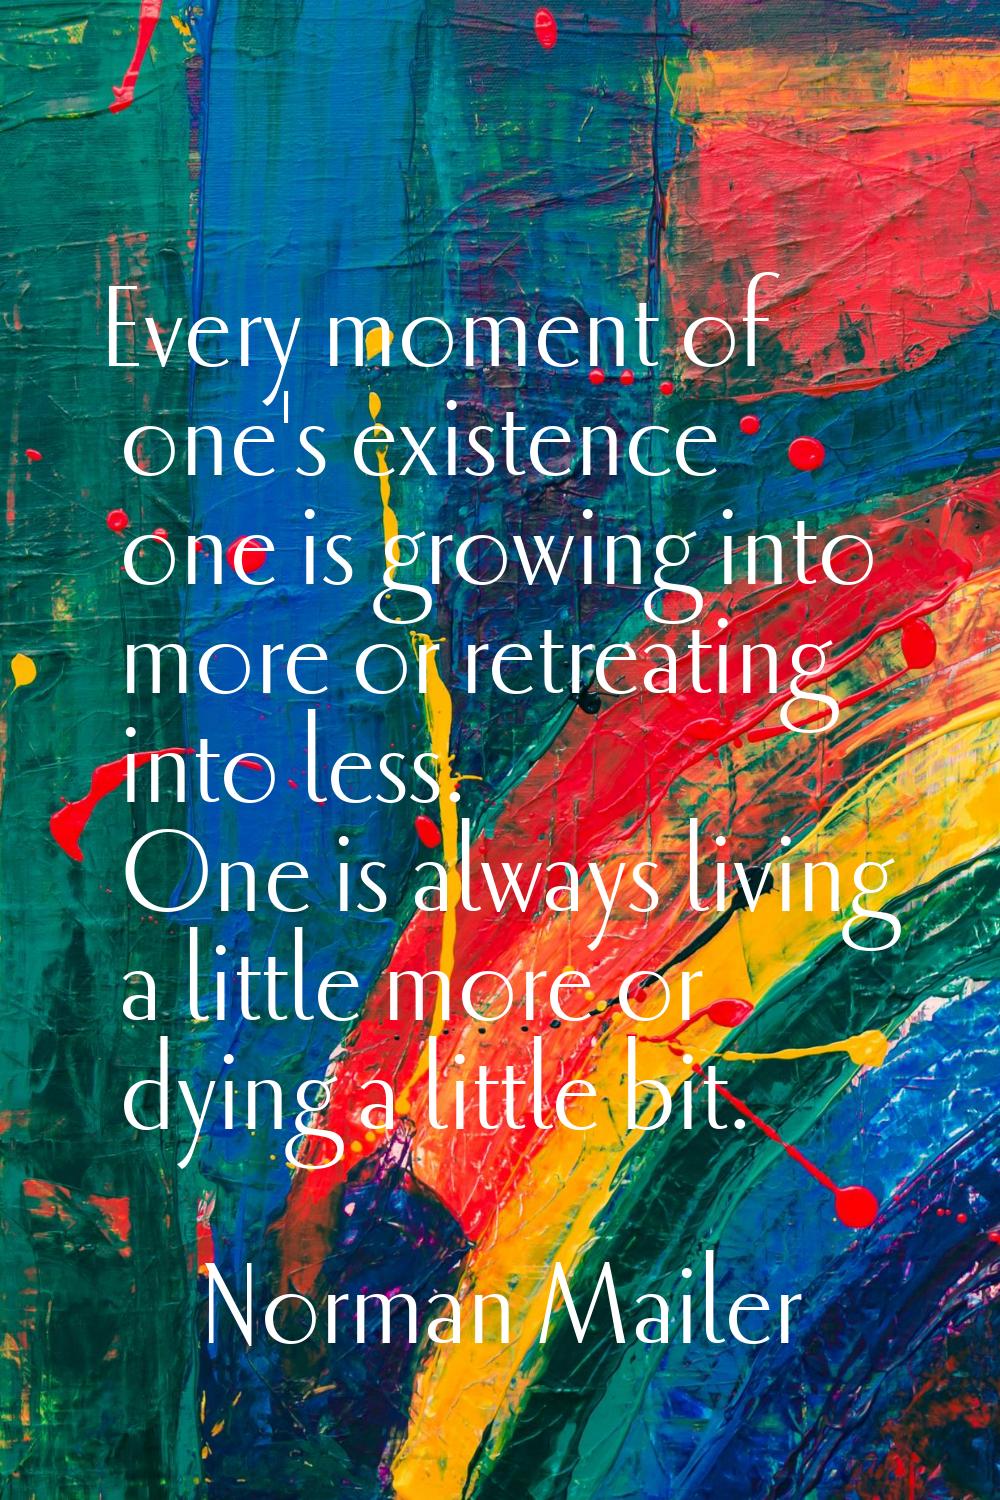 Every moment of one's existence one is growing into more or retreating into less. One is always liv